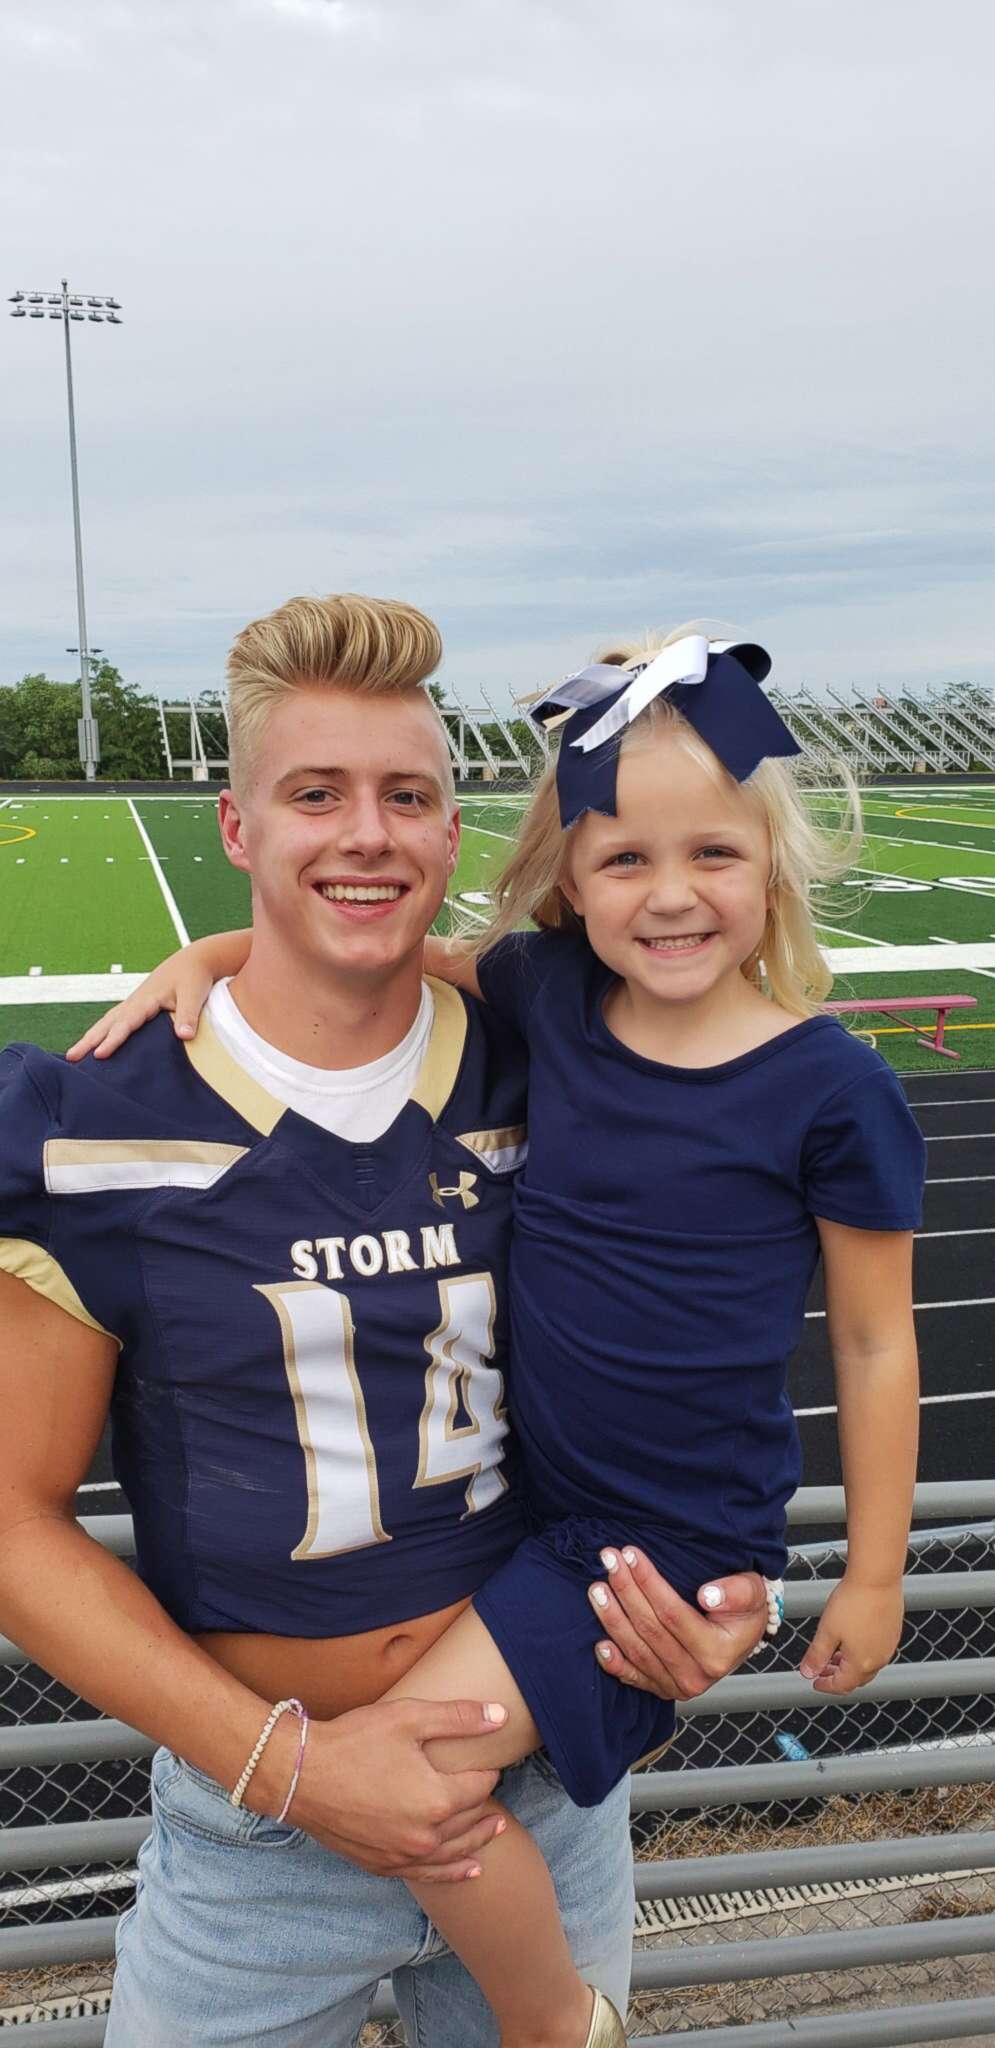 PHOTO: McKinley Blue, 6 and Elliott Brown, 17, have shared a special bond ever since Elliott began visiting her in the hospital when she was injured in a 2018 car accident in Omaha, Nebraska.